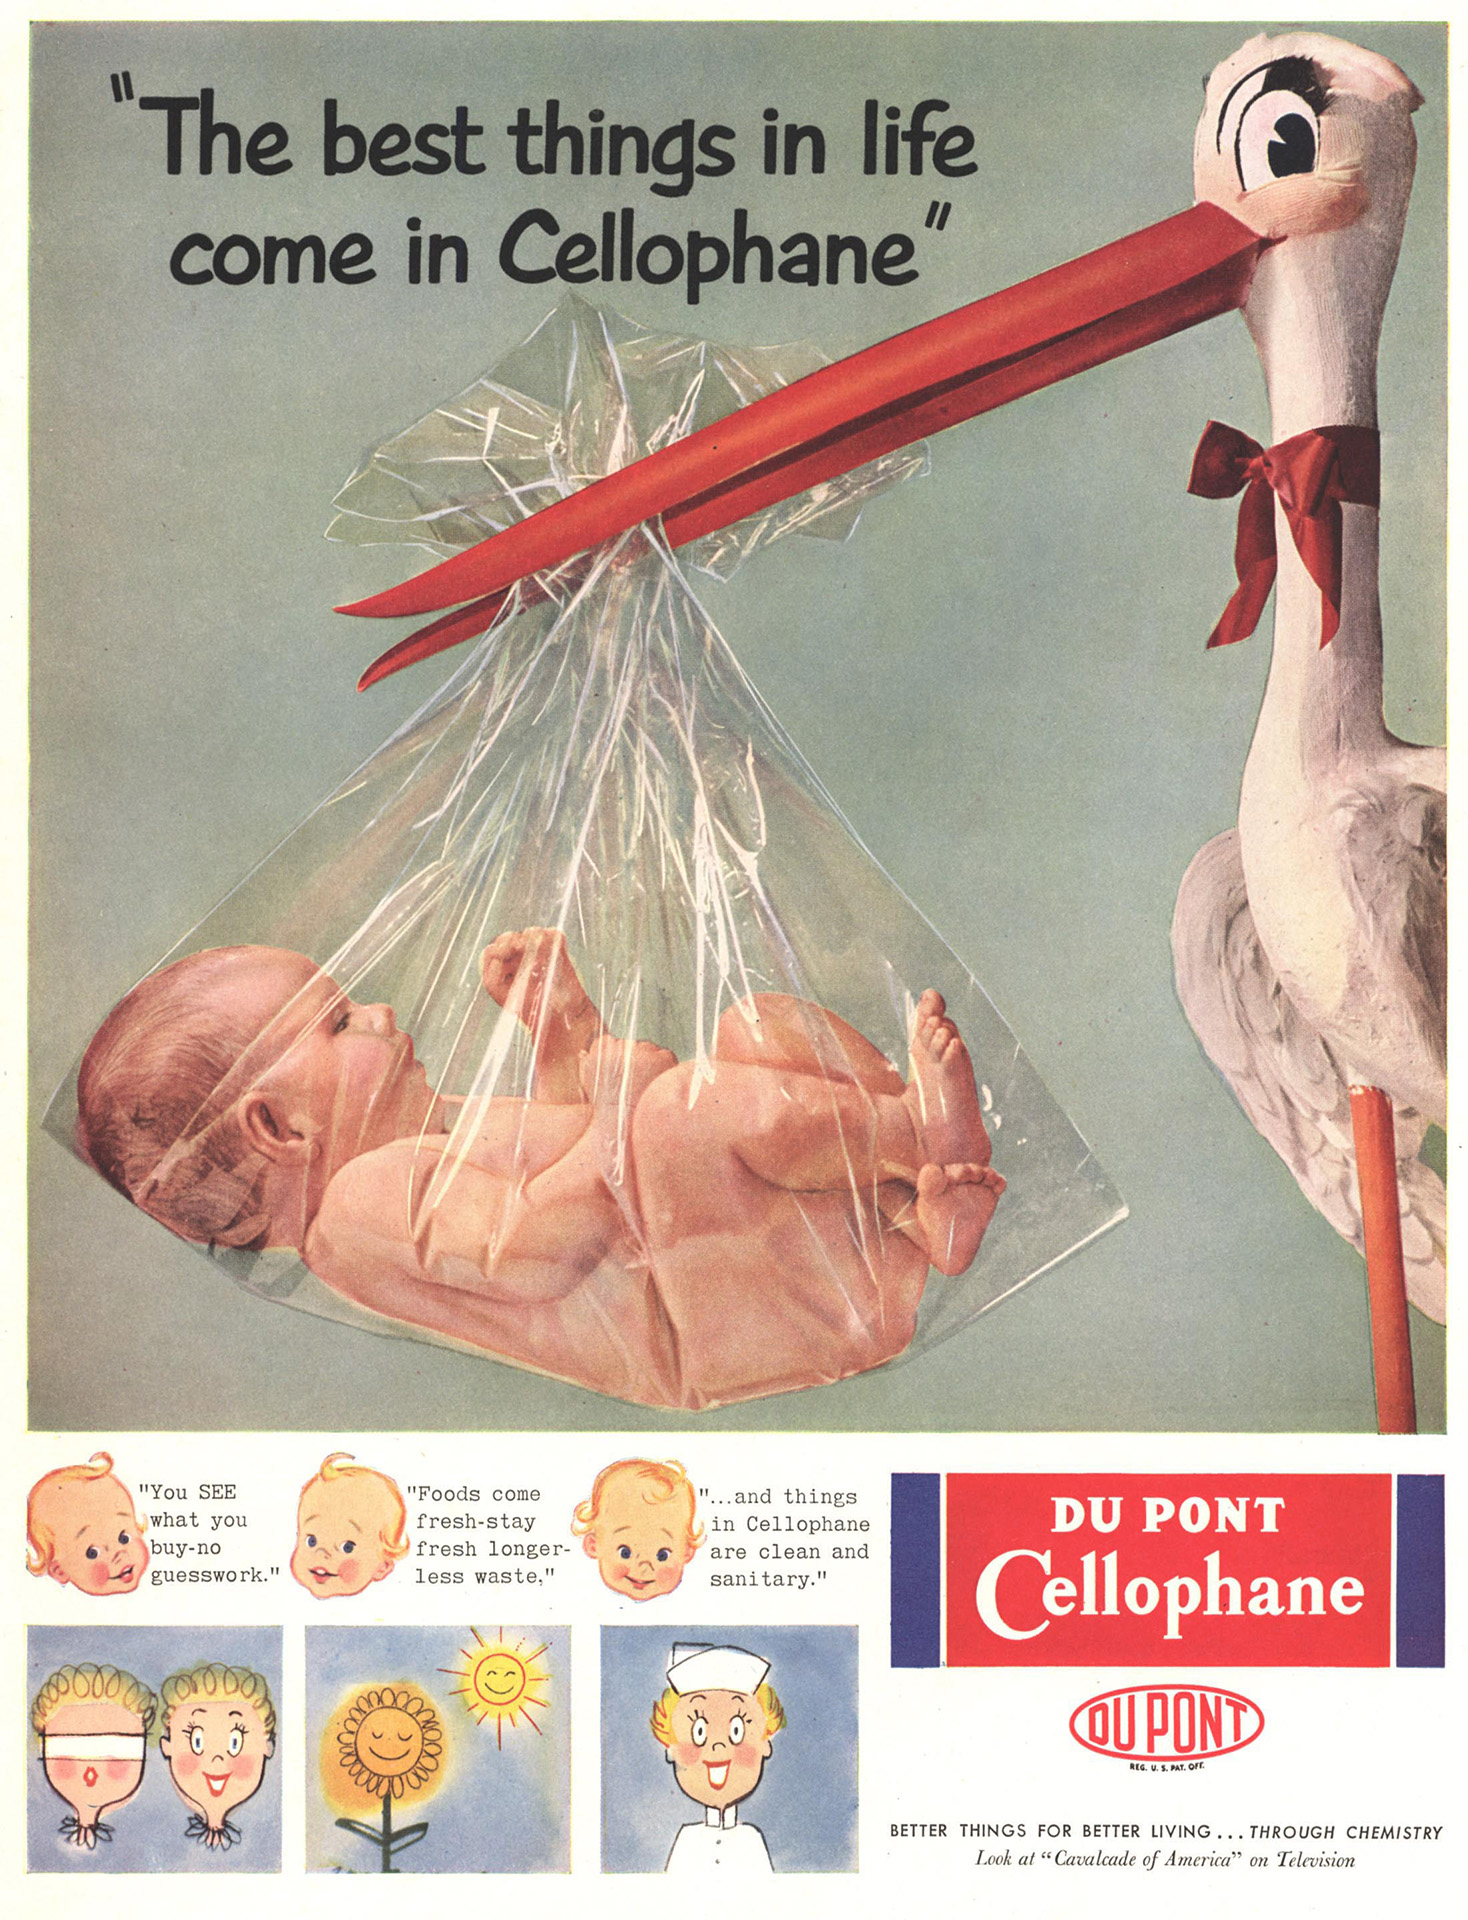 Vintage DuPont Cellophane ad with a stork holding a baby wrapped in cellophane from its beak